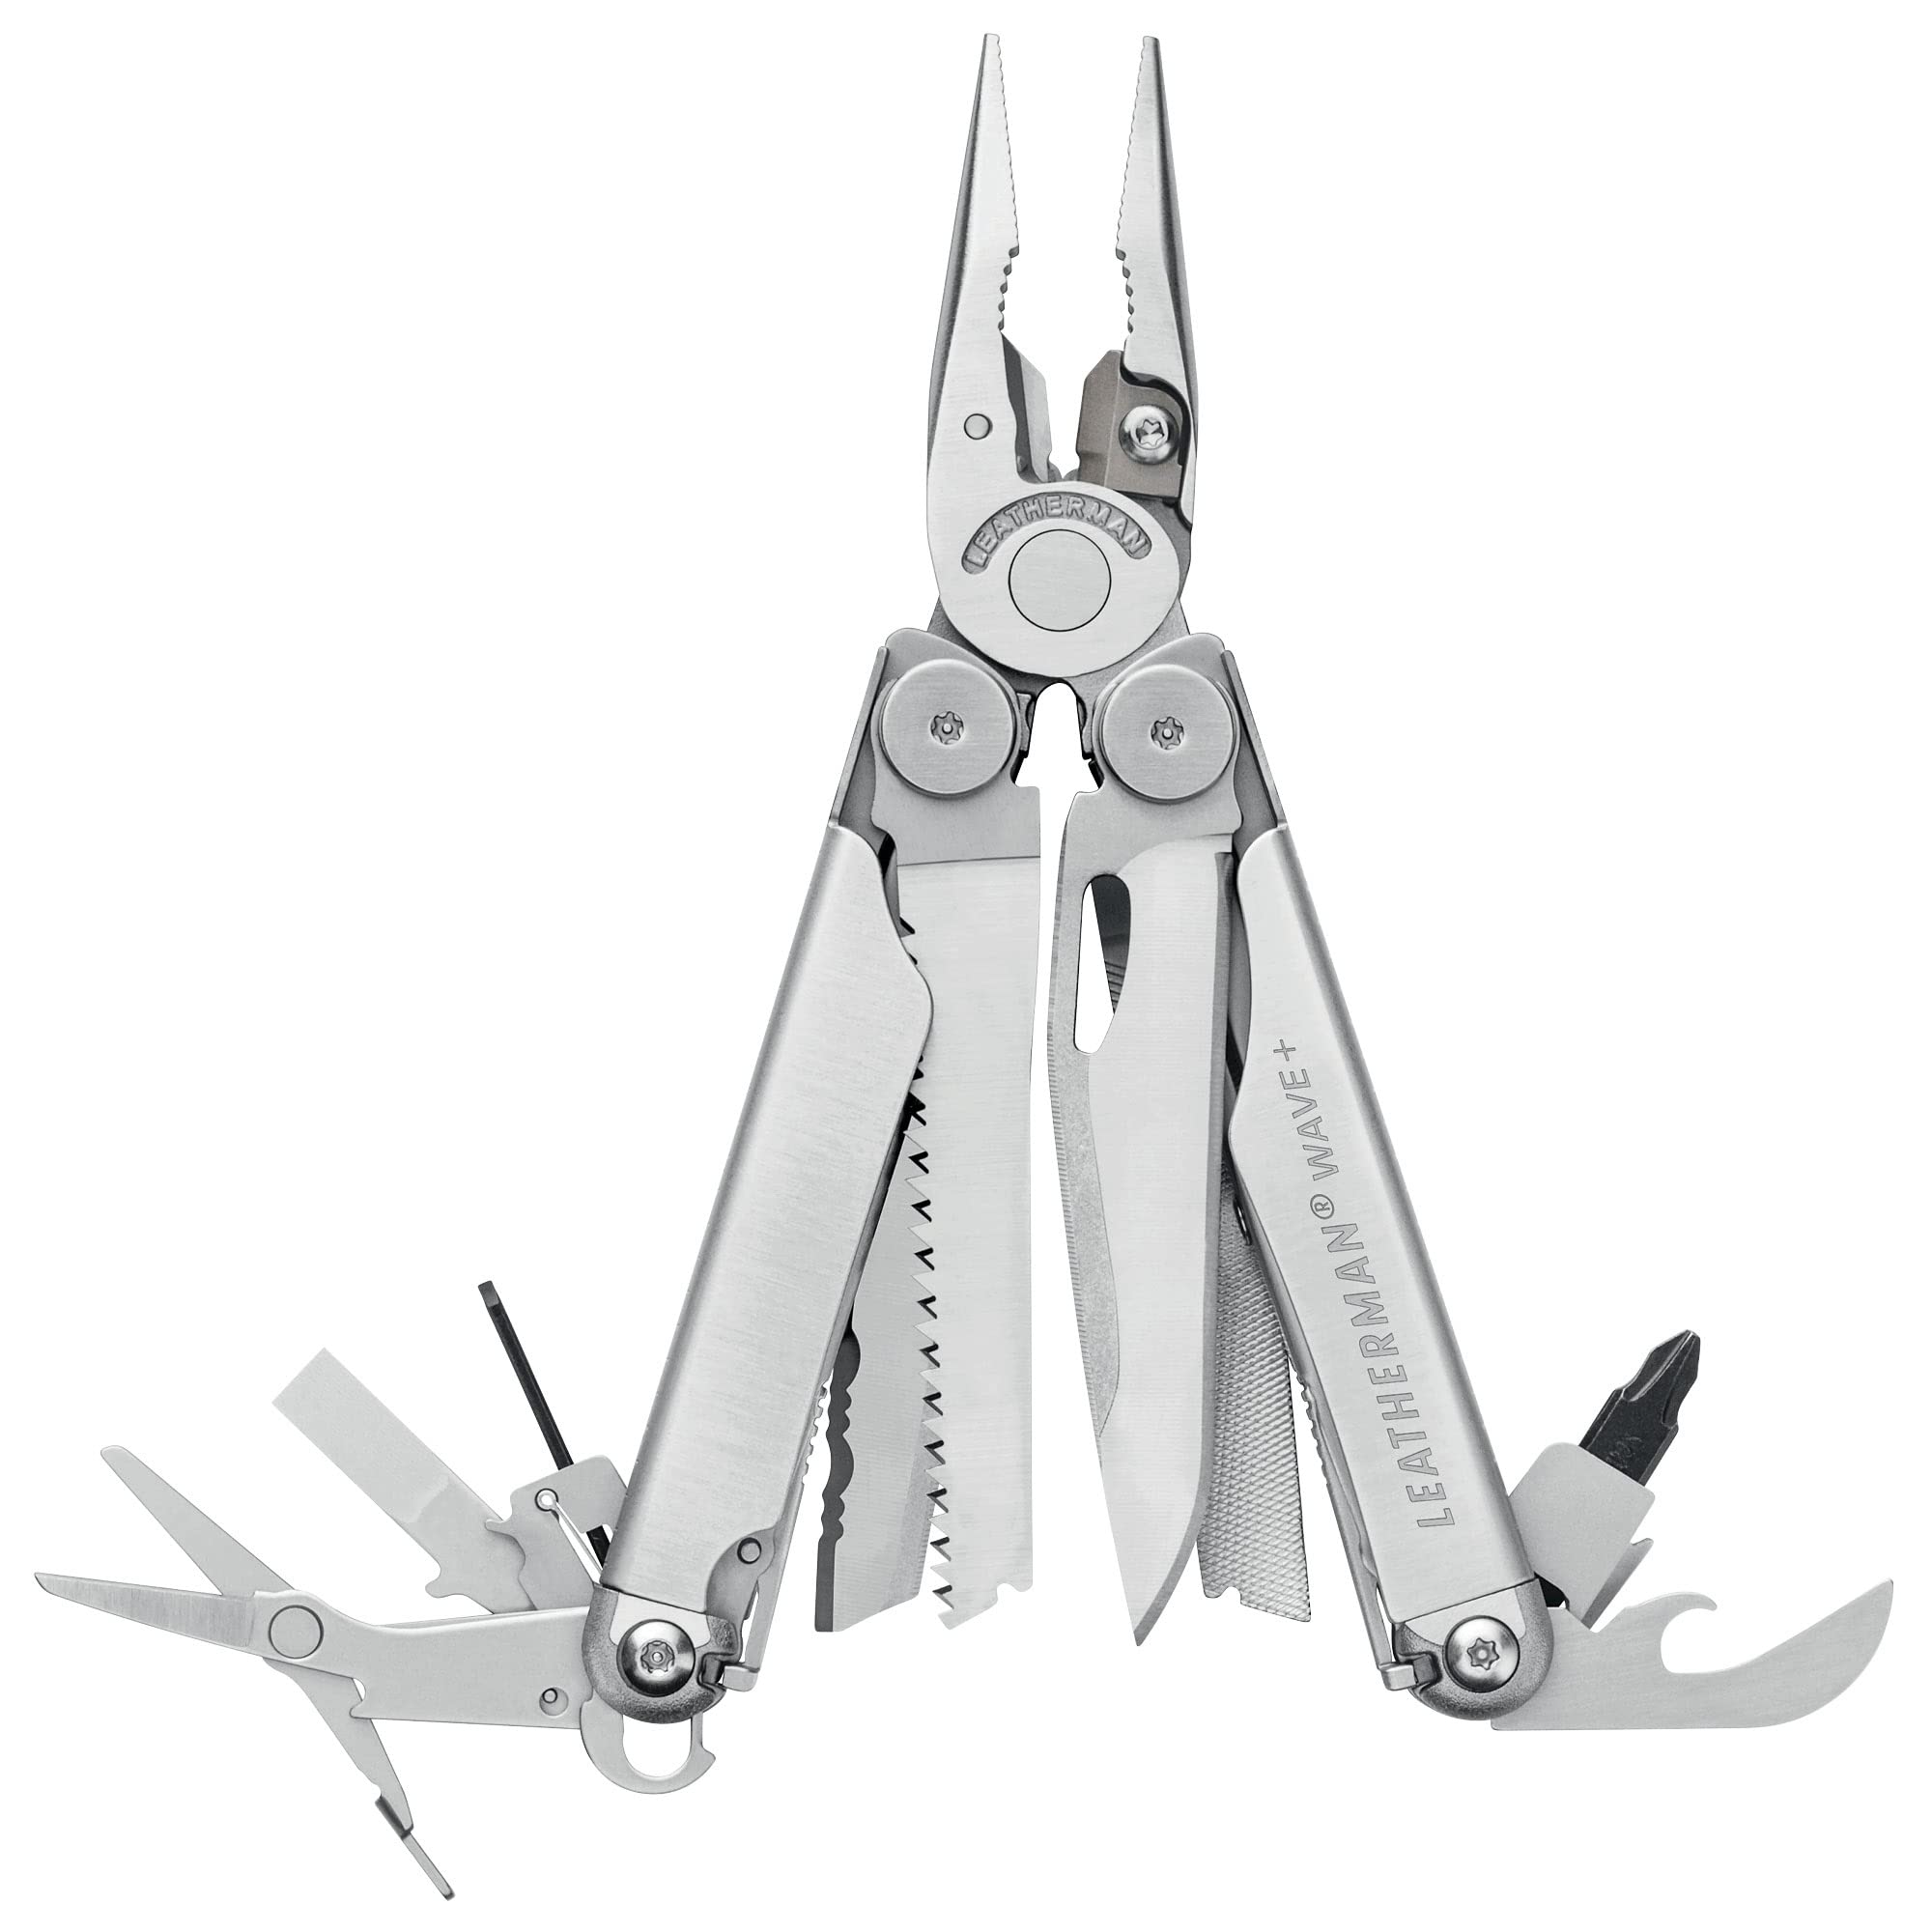 Top Ranked Multi-Tools of 2023